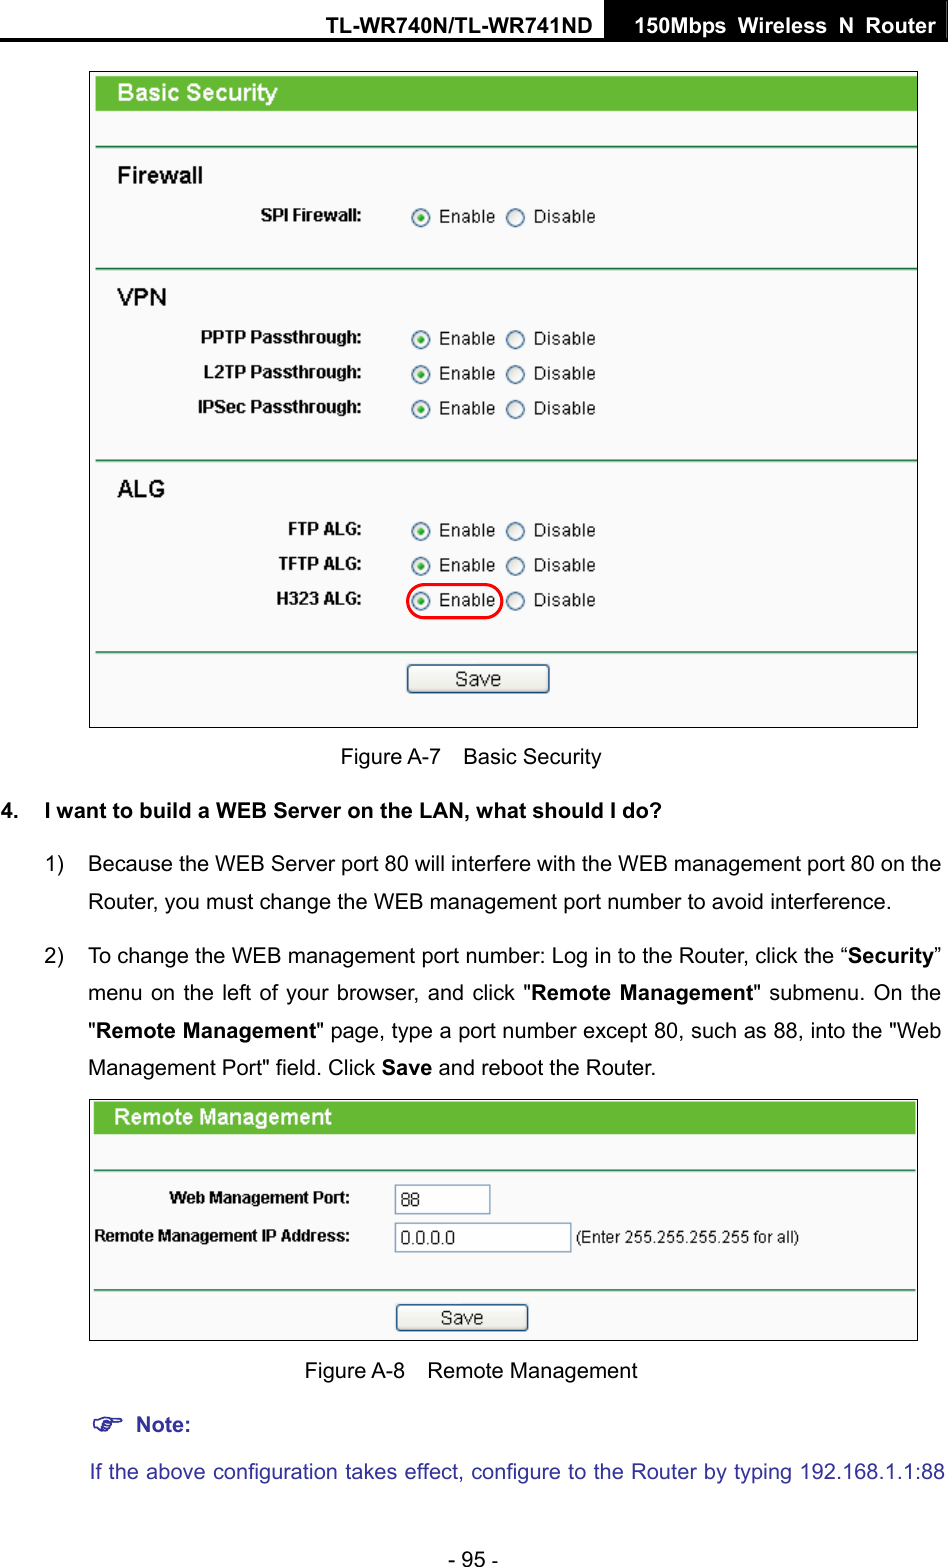 TL-WR740N/TL-WR741ND 150Mbps Wireless N Router - 95 -  Figure A-7  Basic Security 4.  I want to build a WEB Server on the LAN, what should I do? 1)  Because the WEB Server port 80 will interfere with the WEB management port 80 on the Router, you must change the WEB management port number to avoid interference. 2)  To change the WEB management port number: Log in to the Router, click the “Security” menu on the left of your browser, and click &quot;Remote Management&quot; submenu. On the &quot;Remote Management&quot; page, type a port number except 80, such as 88, into the &quot;Web Management Port&quot; field. Click Save and reboot the Router.  Figure A-8  Remote Management ) Note: If the above configuration takes effect, configure to the Router by typing 192.168.1.1:88 